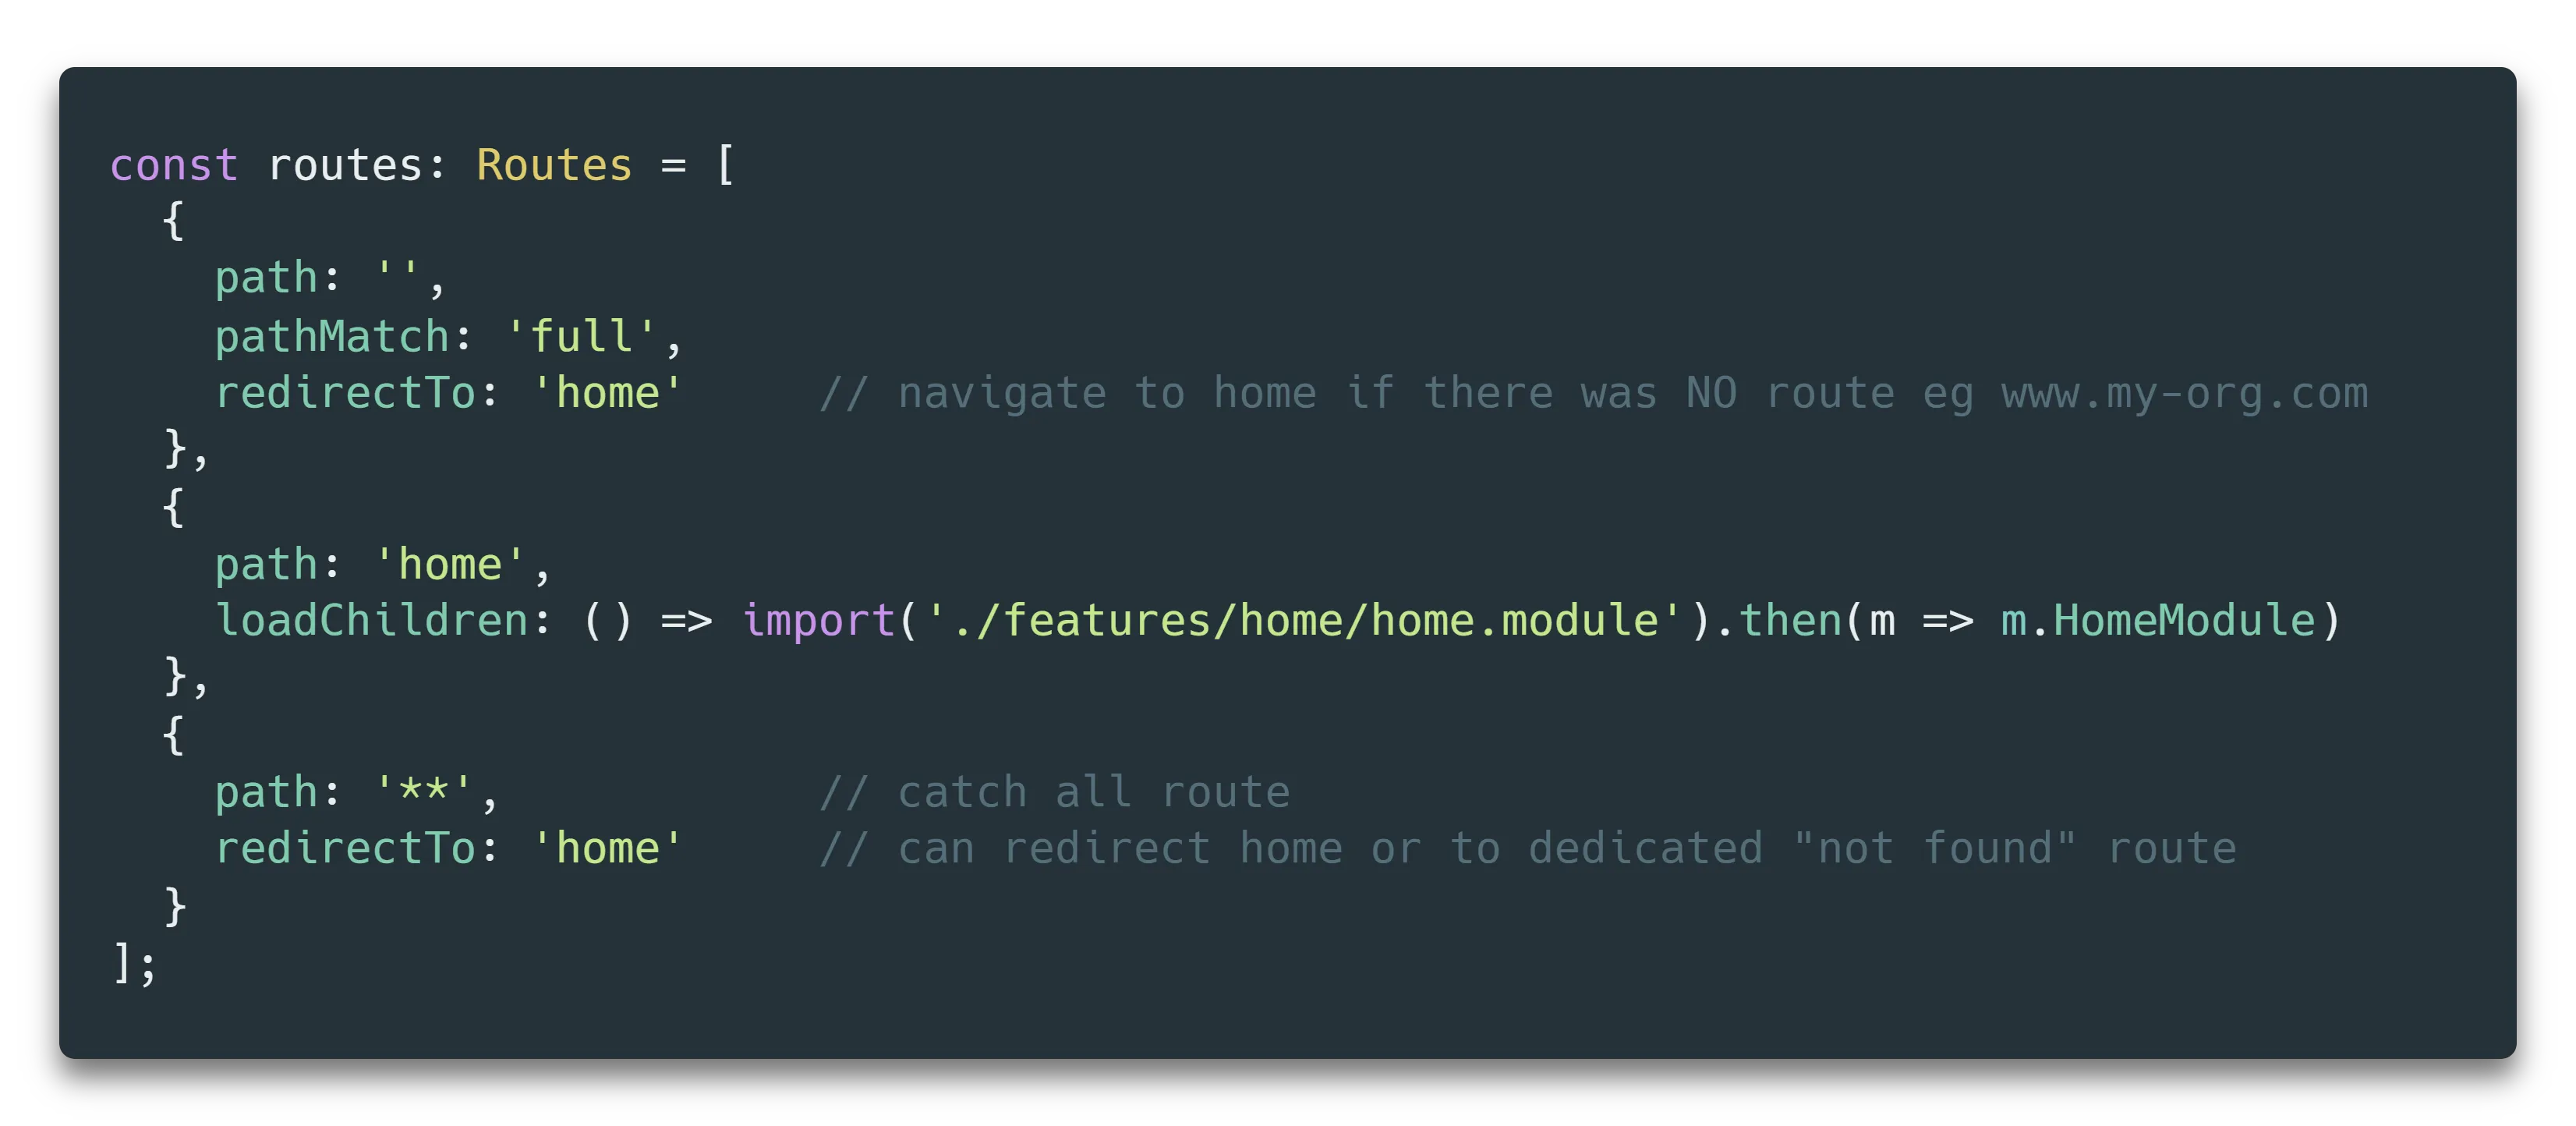 Angular routing config example with generated “home” lazy route, initial redirect and catch all route